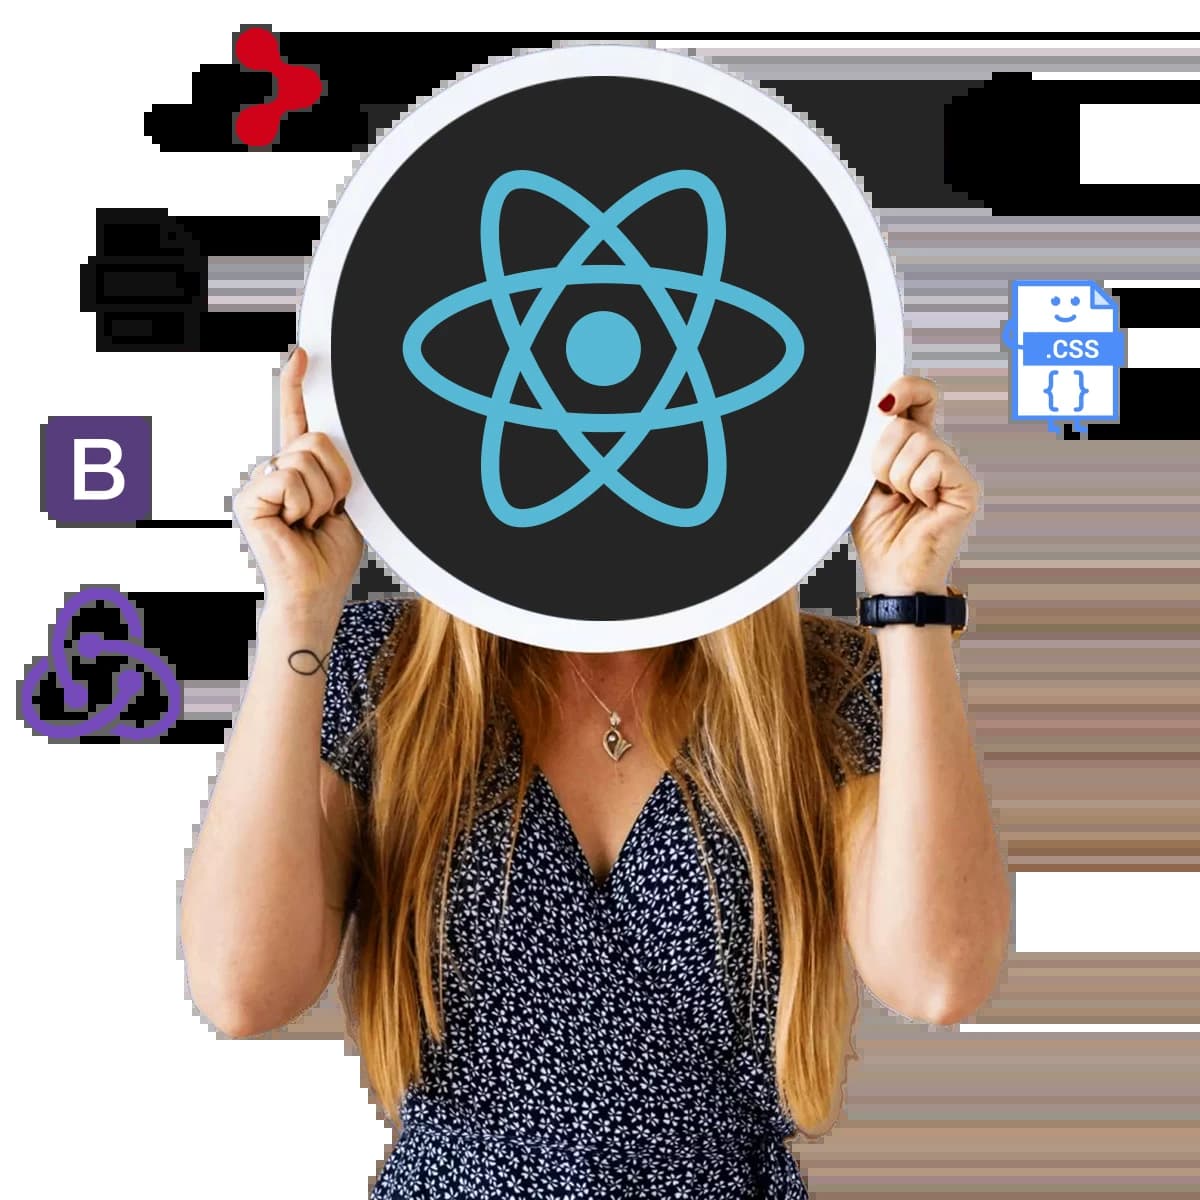 Professional training in React to build and deploy React applications, including React Router, Redux, and other popular libraries.